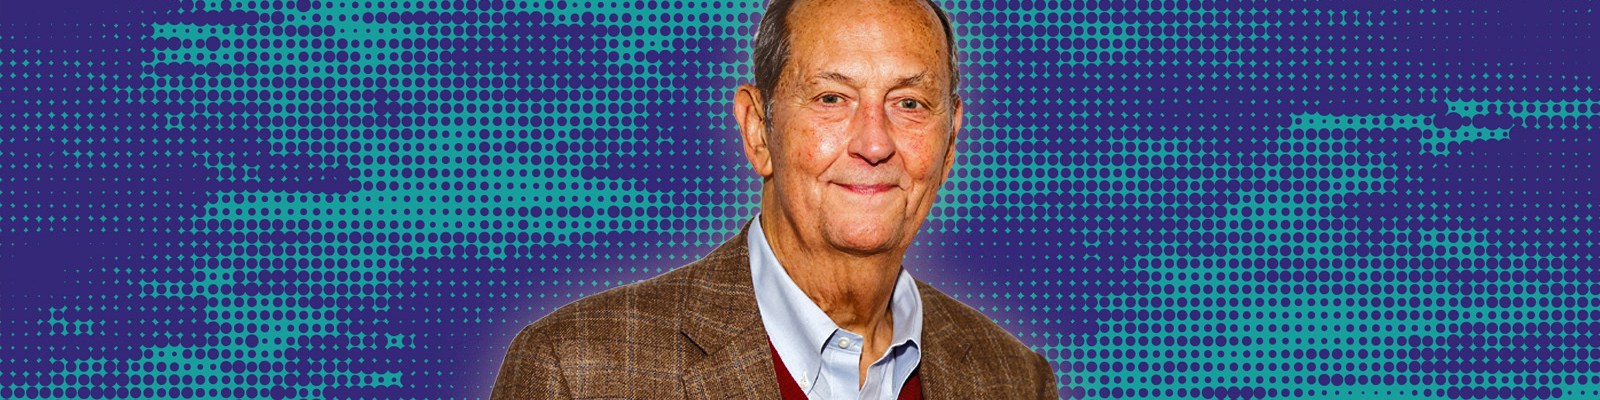 Bill Bradley Wants Our ‘Common Humanity’ To Become The Most Important Thing